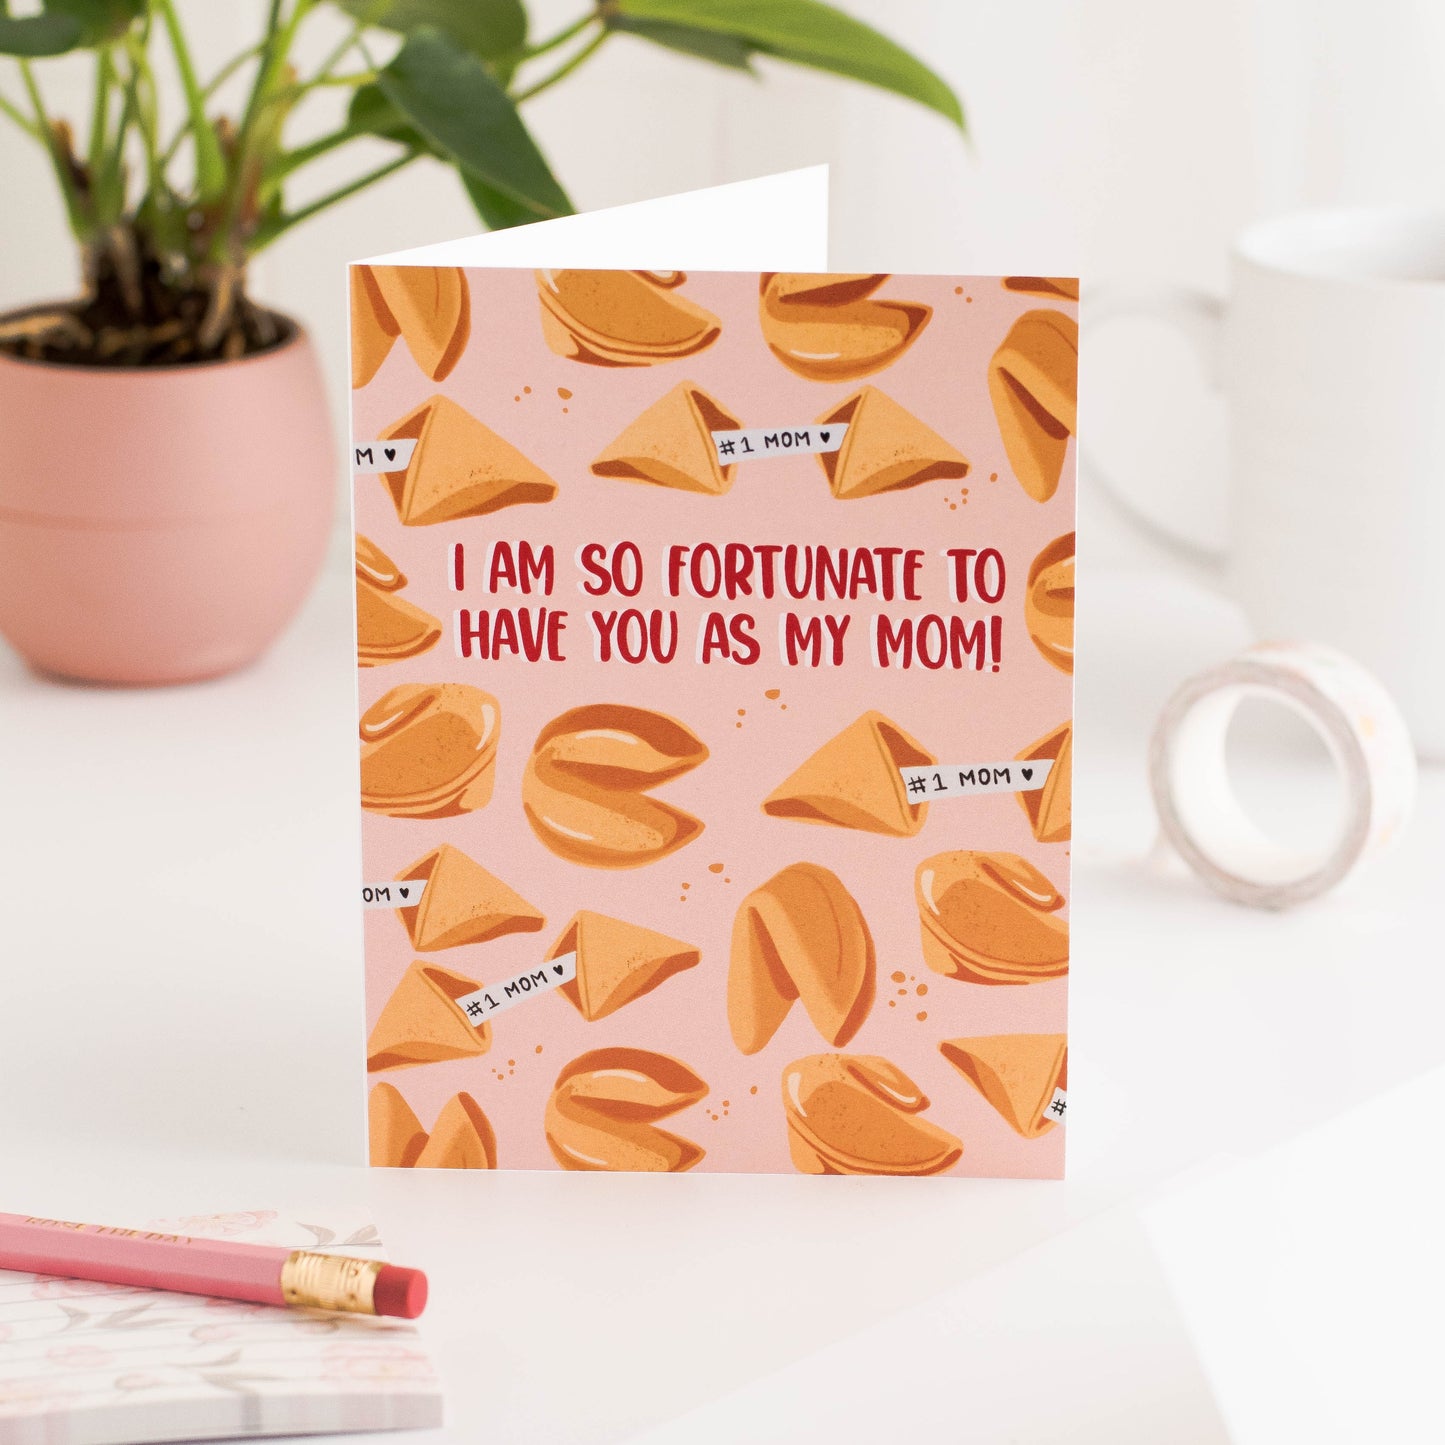 I Am So Fortunate To Have You As My Mom! - Greeting Card